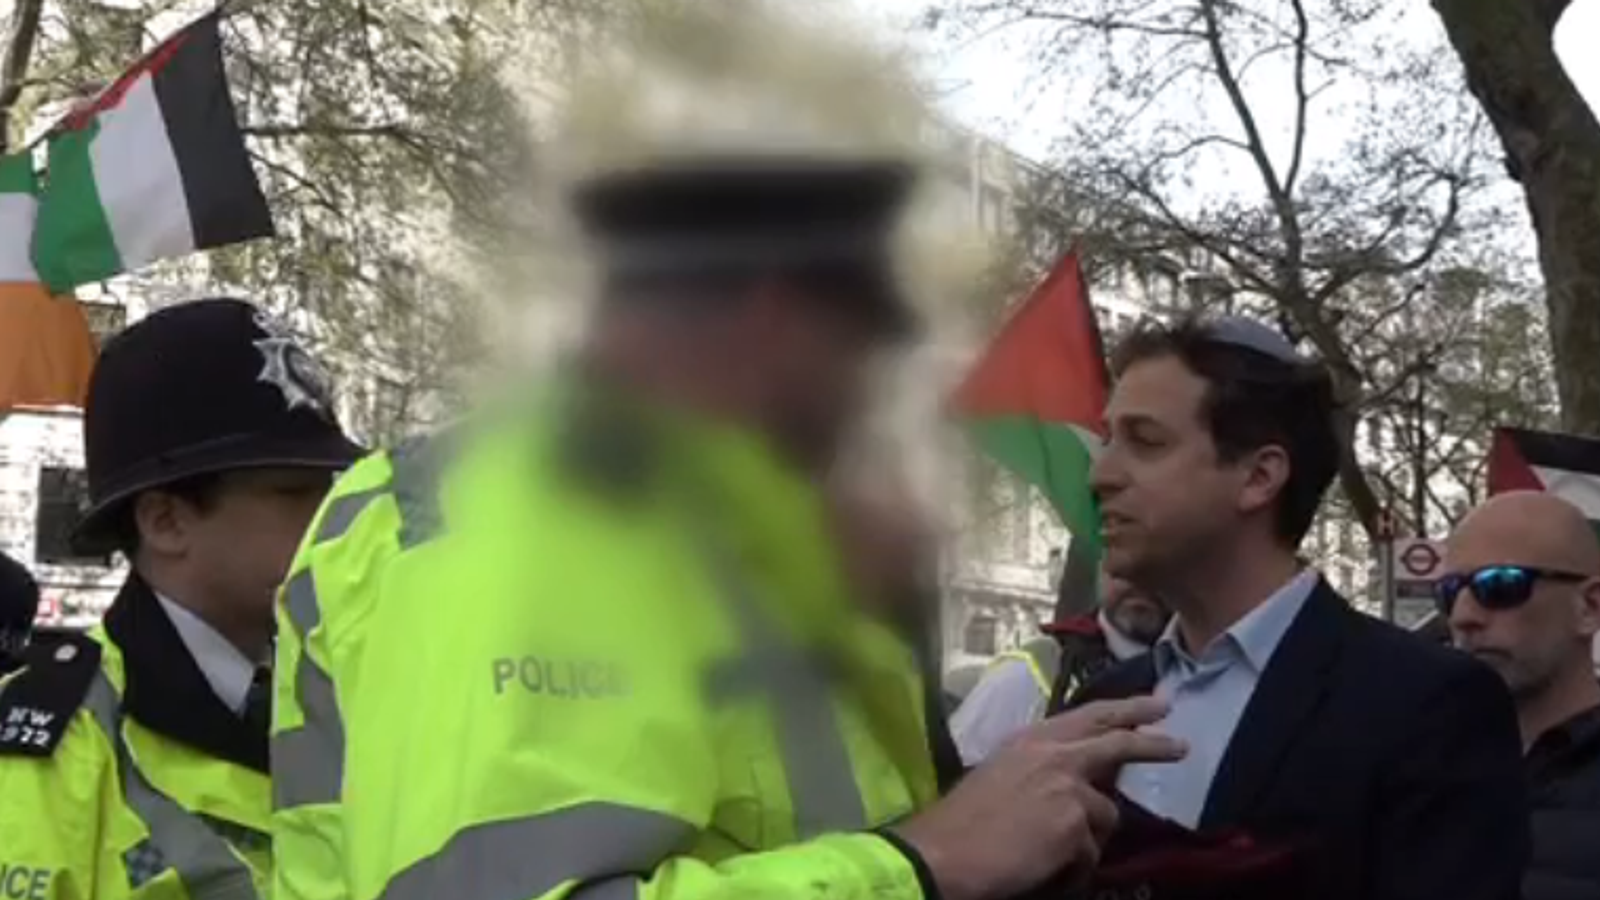 'I was Jewish and crossing the street': Campaigner criticises 'outrageous' reaction to antisemitism row